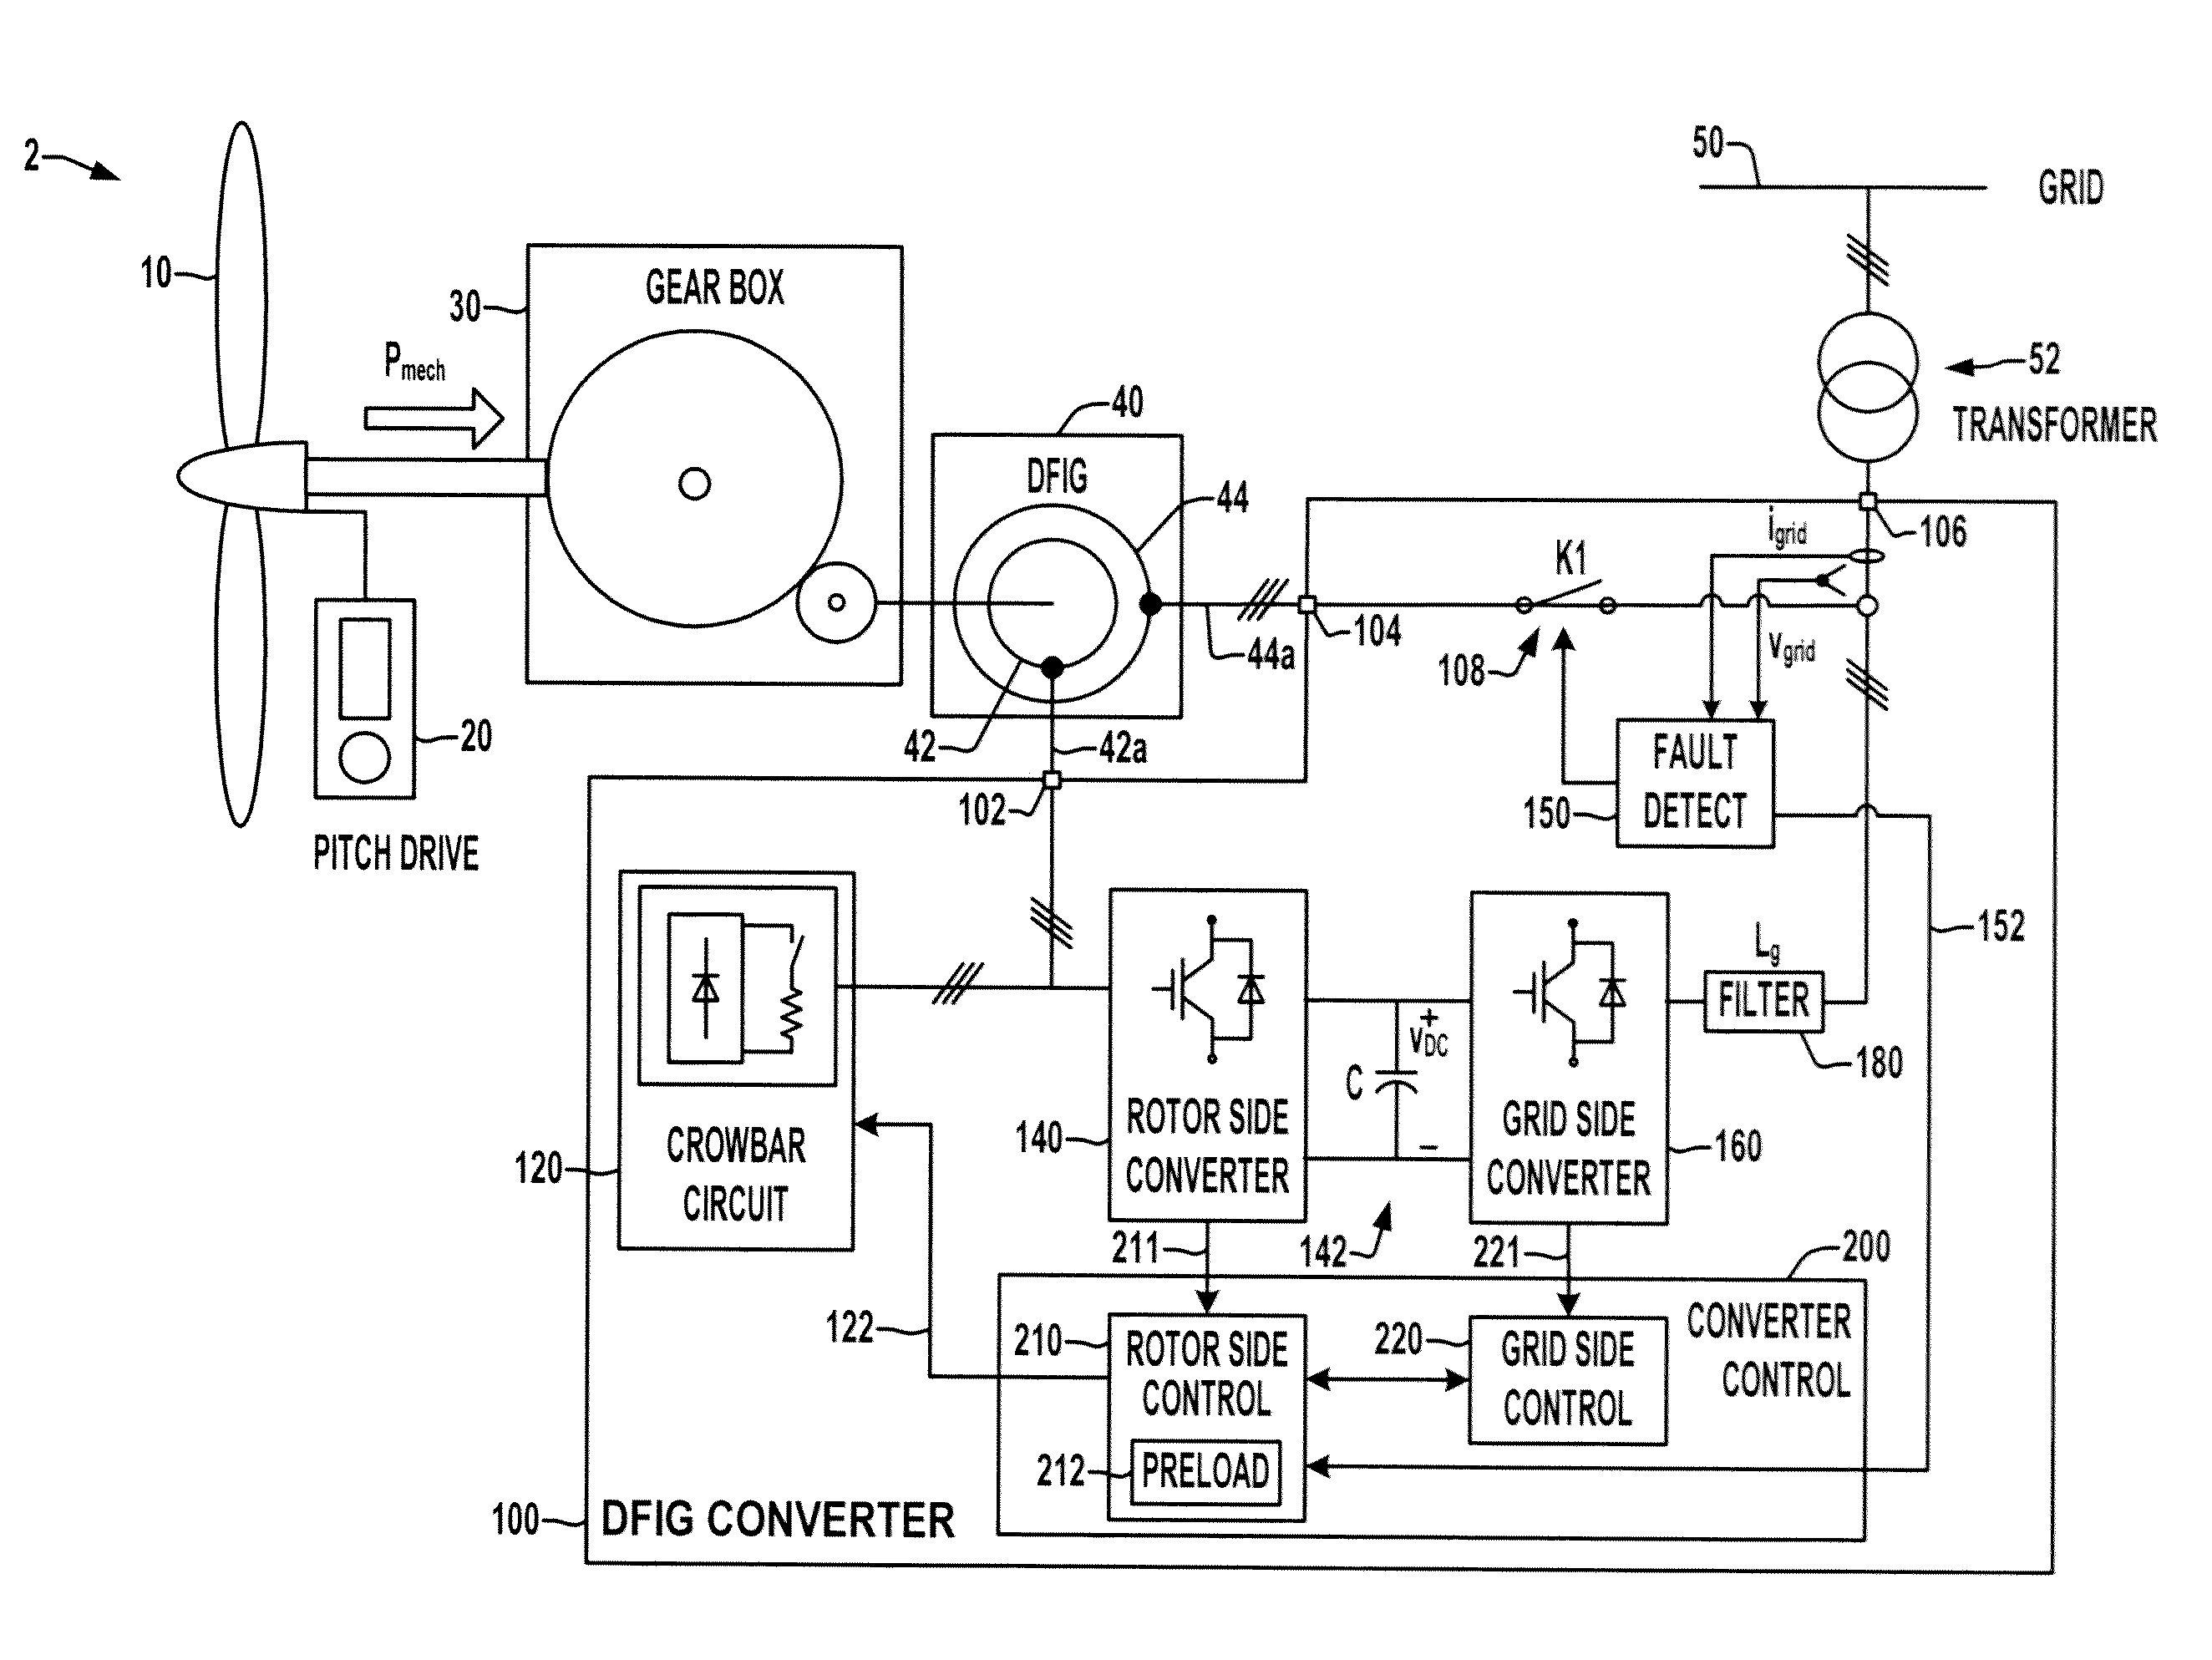 Double fed induction generator converter and method for suppressing transient in deactivation of crowbar circuit for grid fault ridethrough